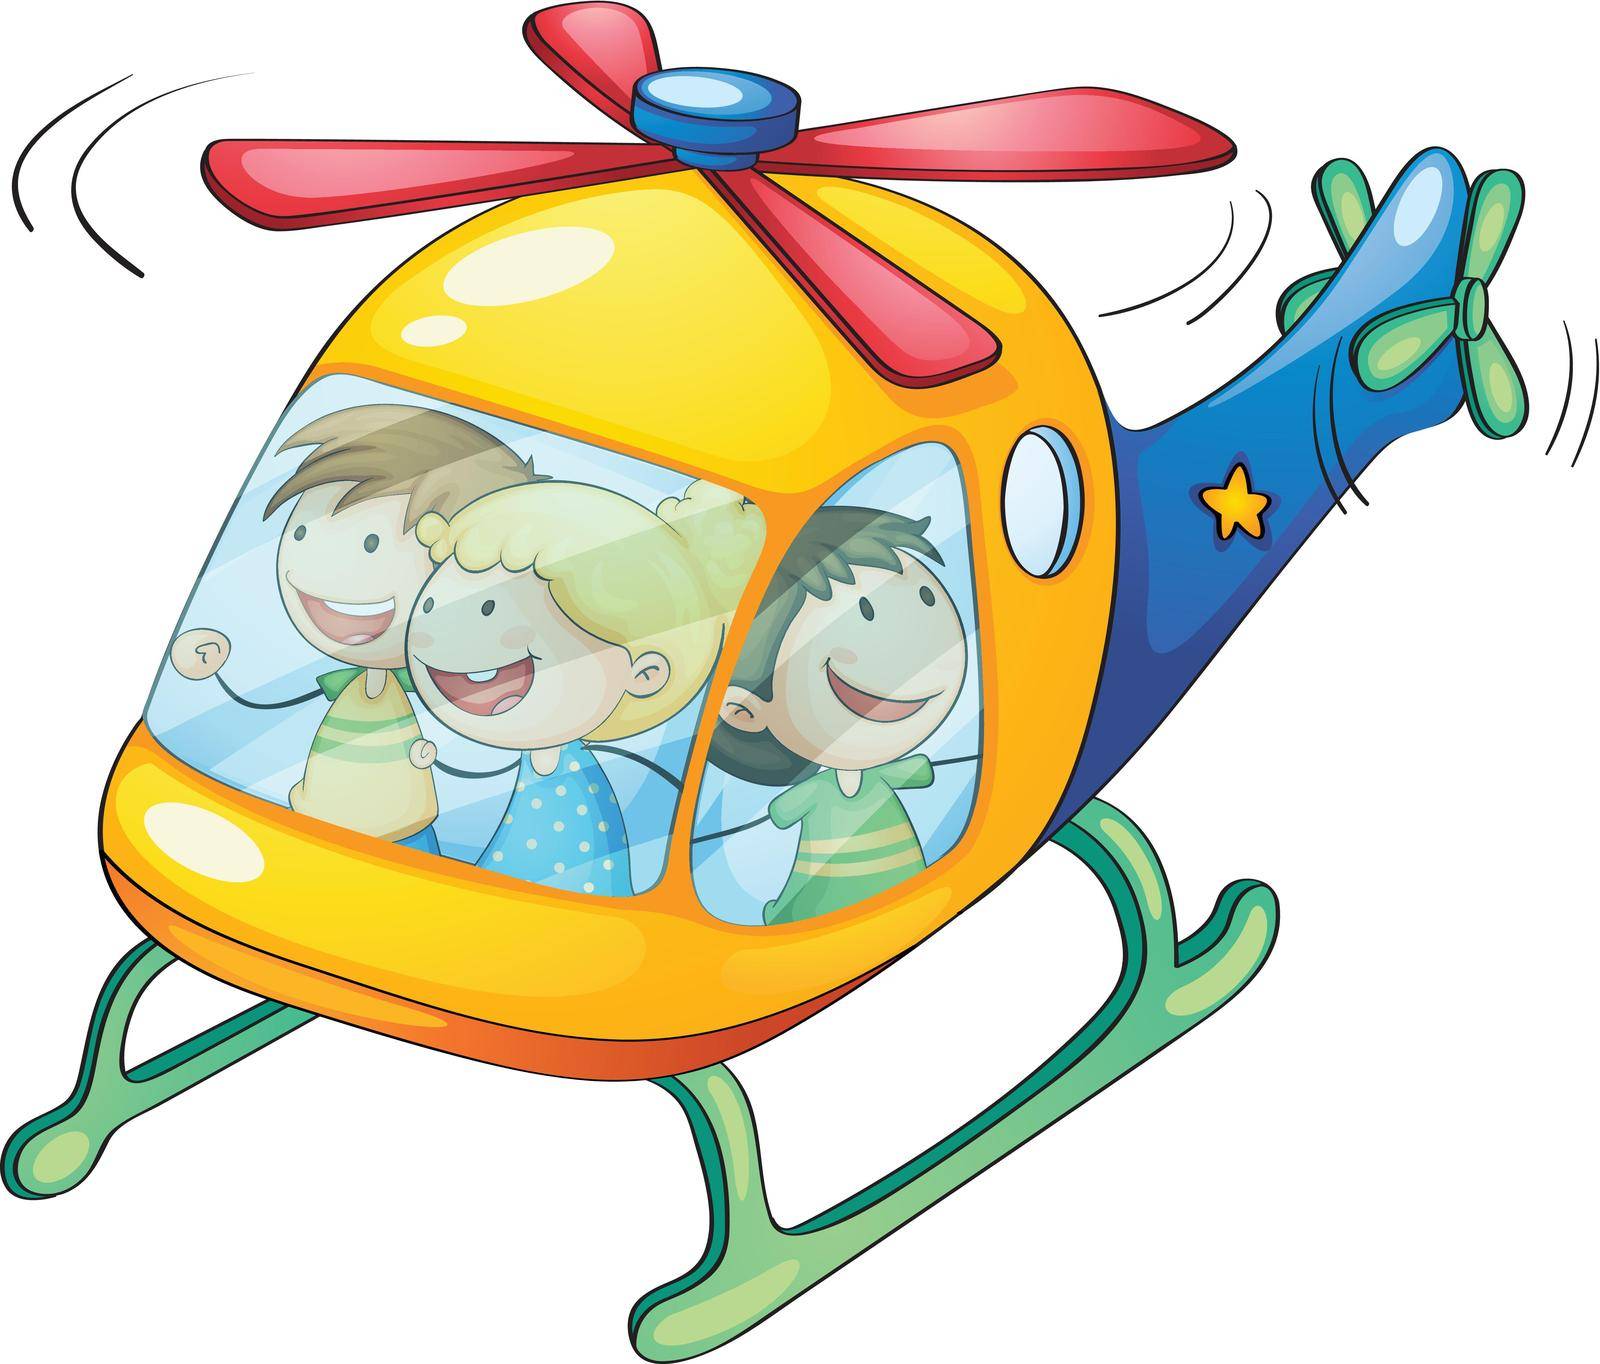 illustration of a kids in a helicopter